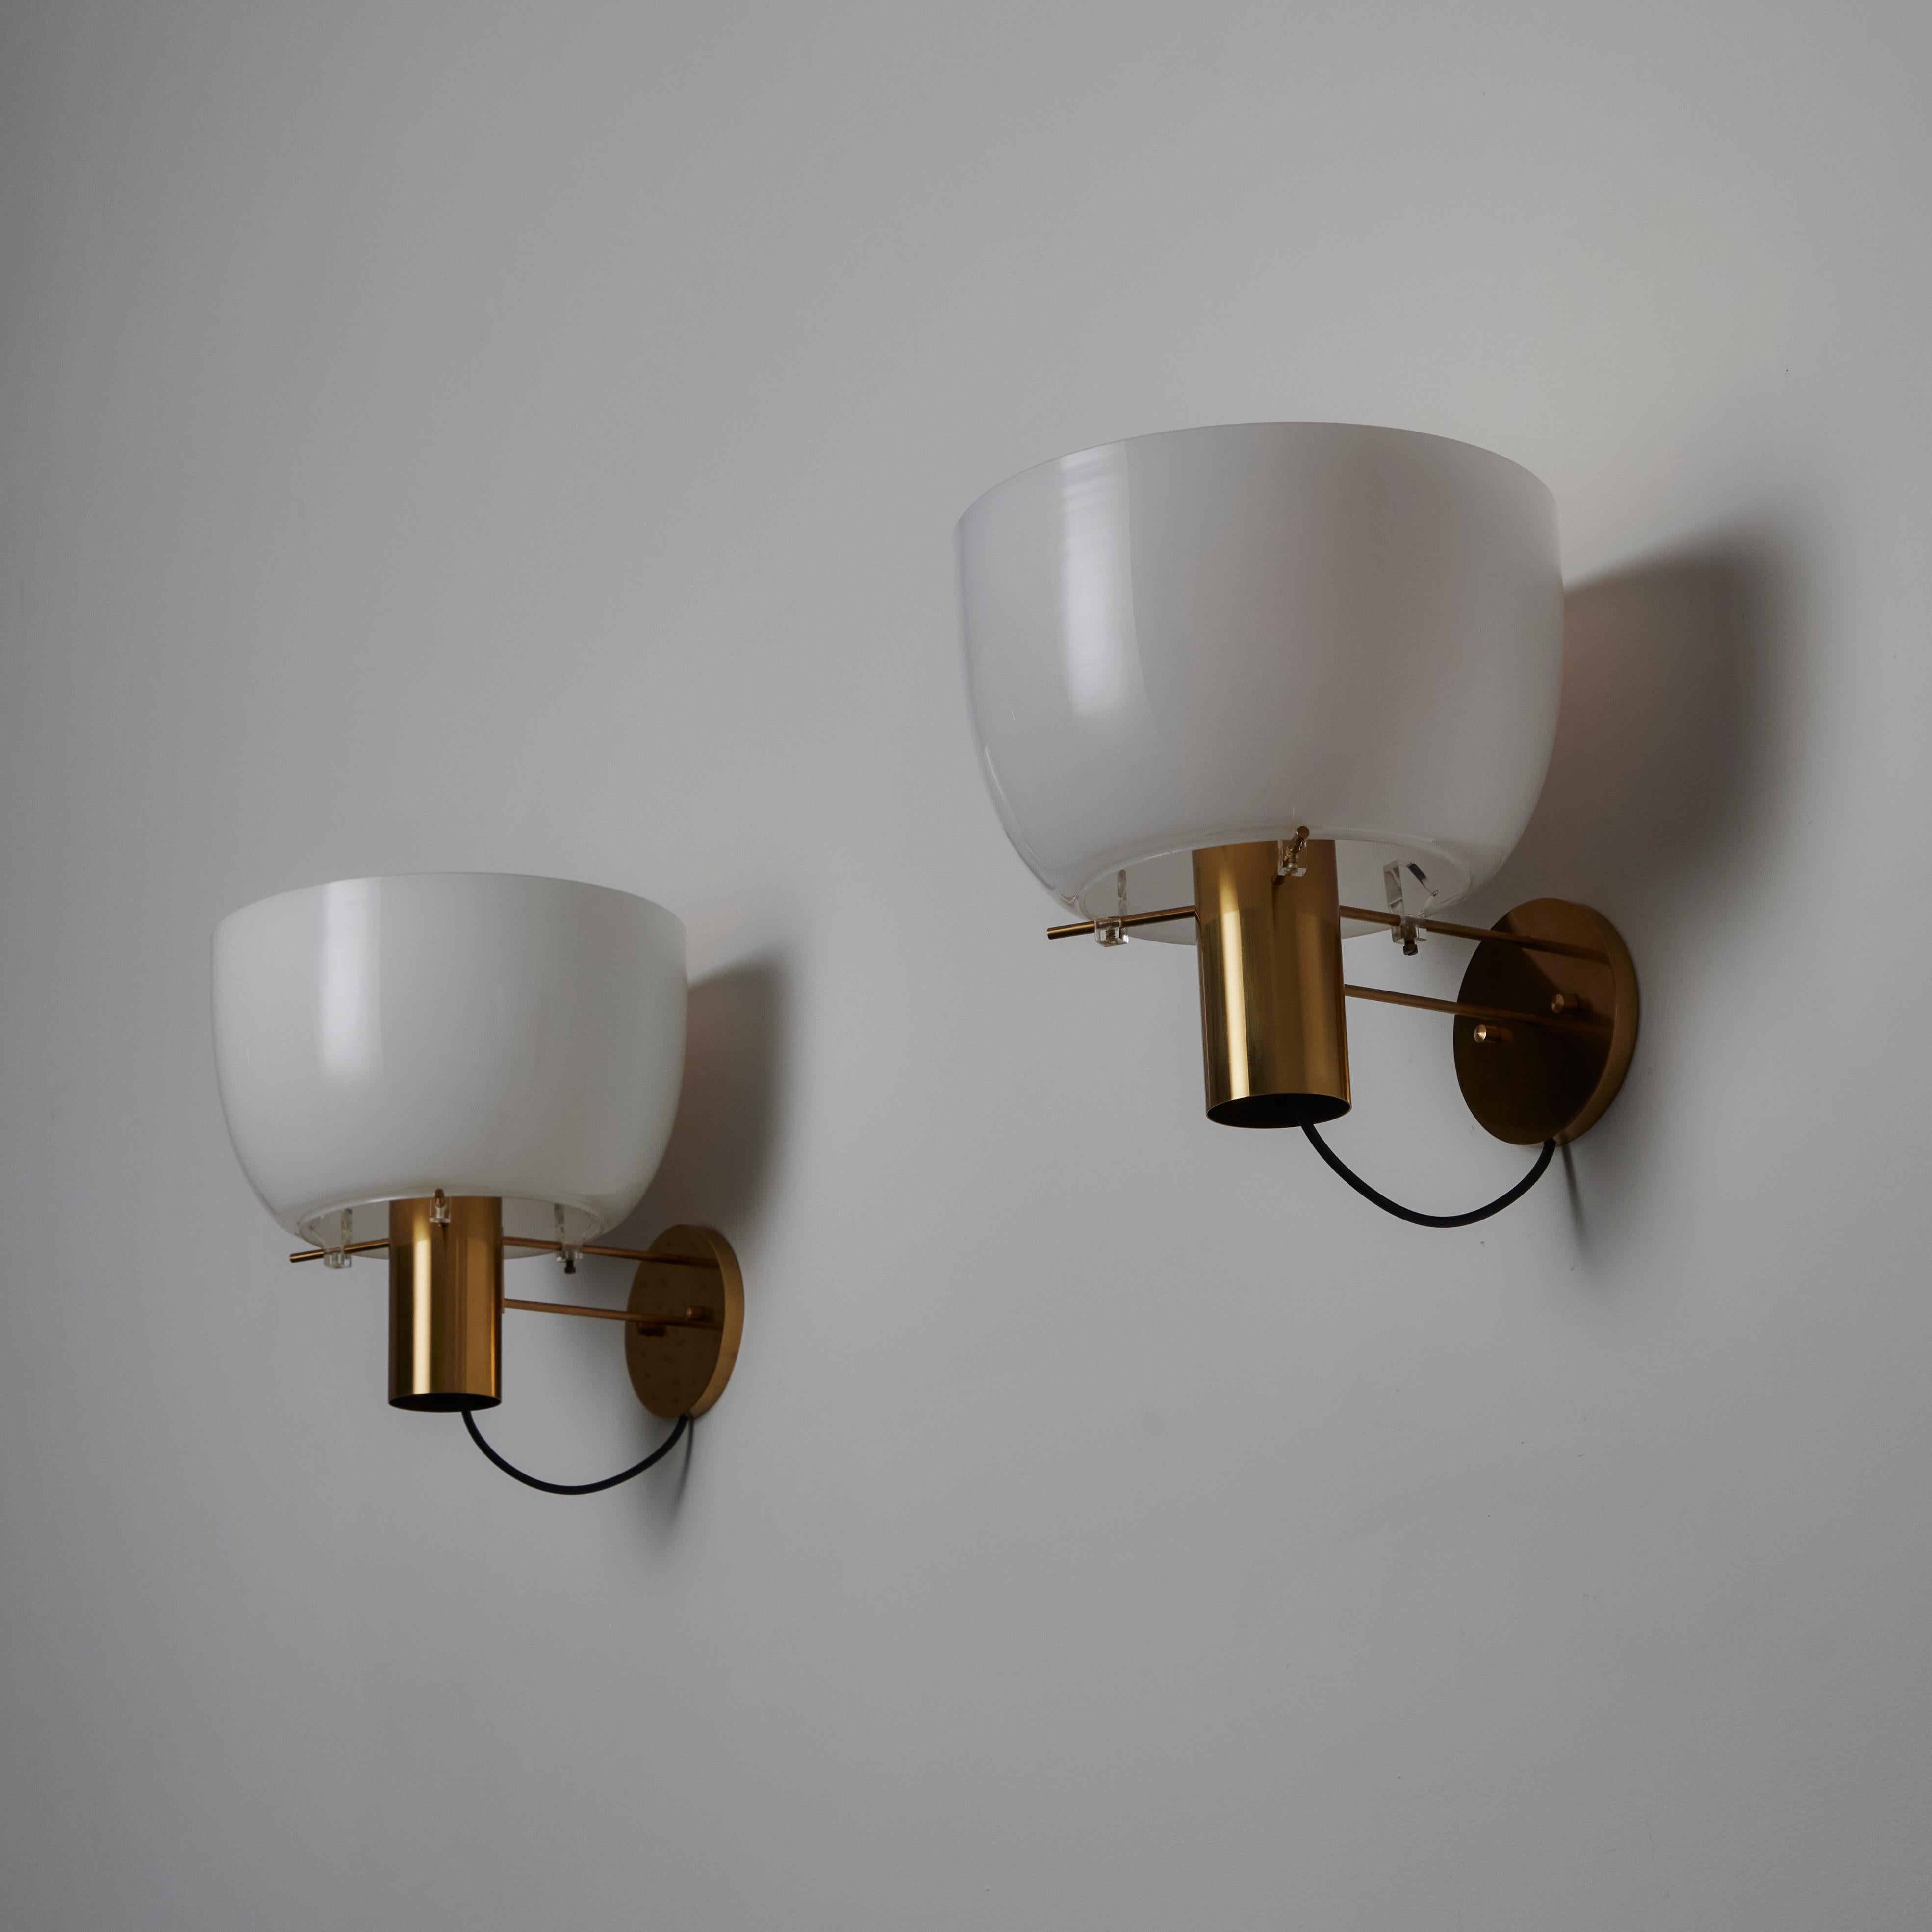 Mid-20th Century Pair of Model 1121 Sconces by Ostuni & Forti for Oluce For Sale